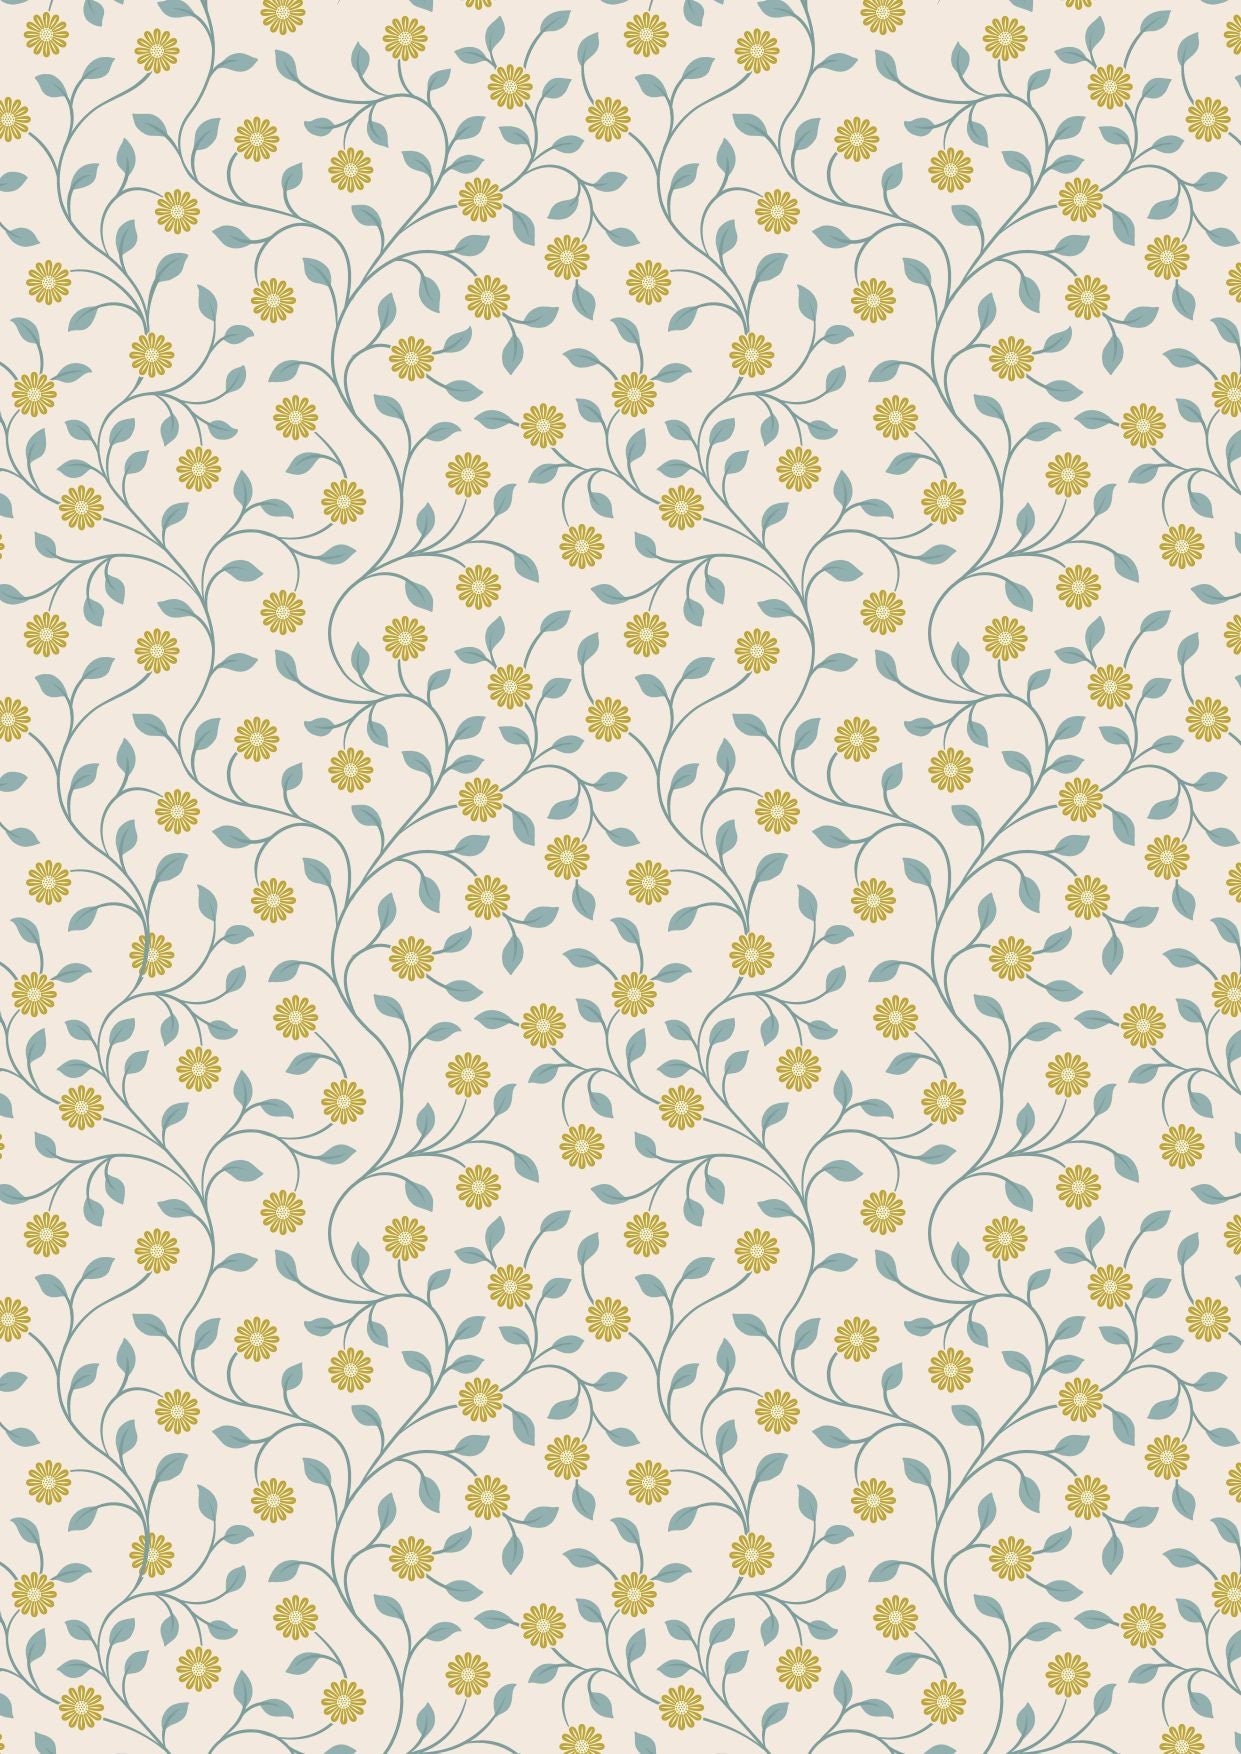 Gold Metallic Pears and Flowers on Cream 100% cotton fabric - Wintertide by Lewis & Irene